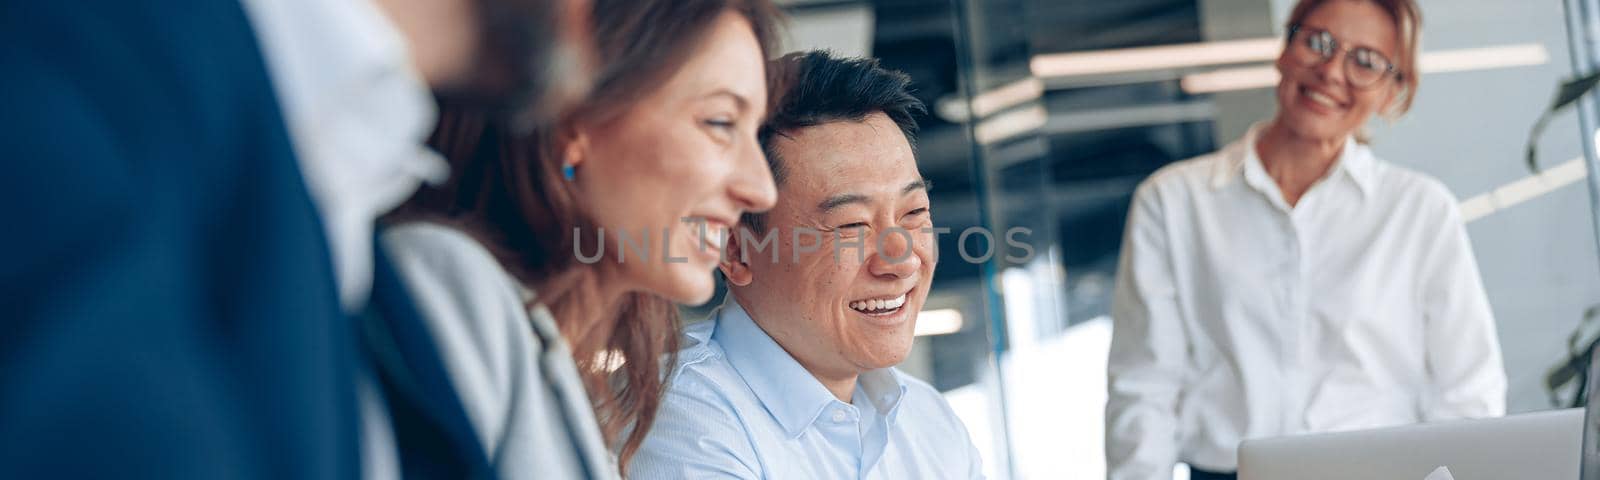 Close up of smiling confident businesswoman on business meeting with colleagues in office